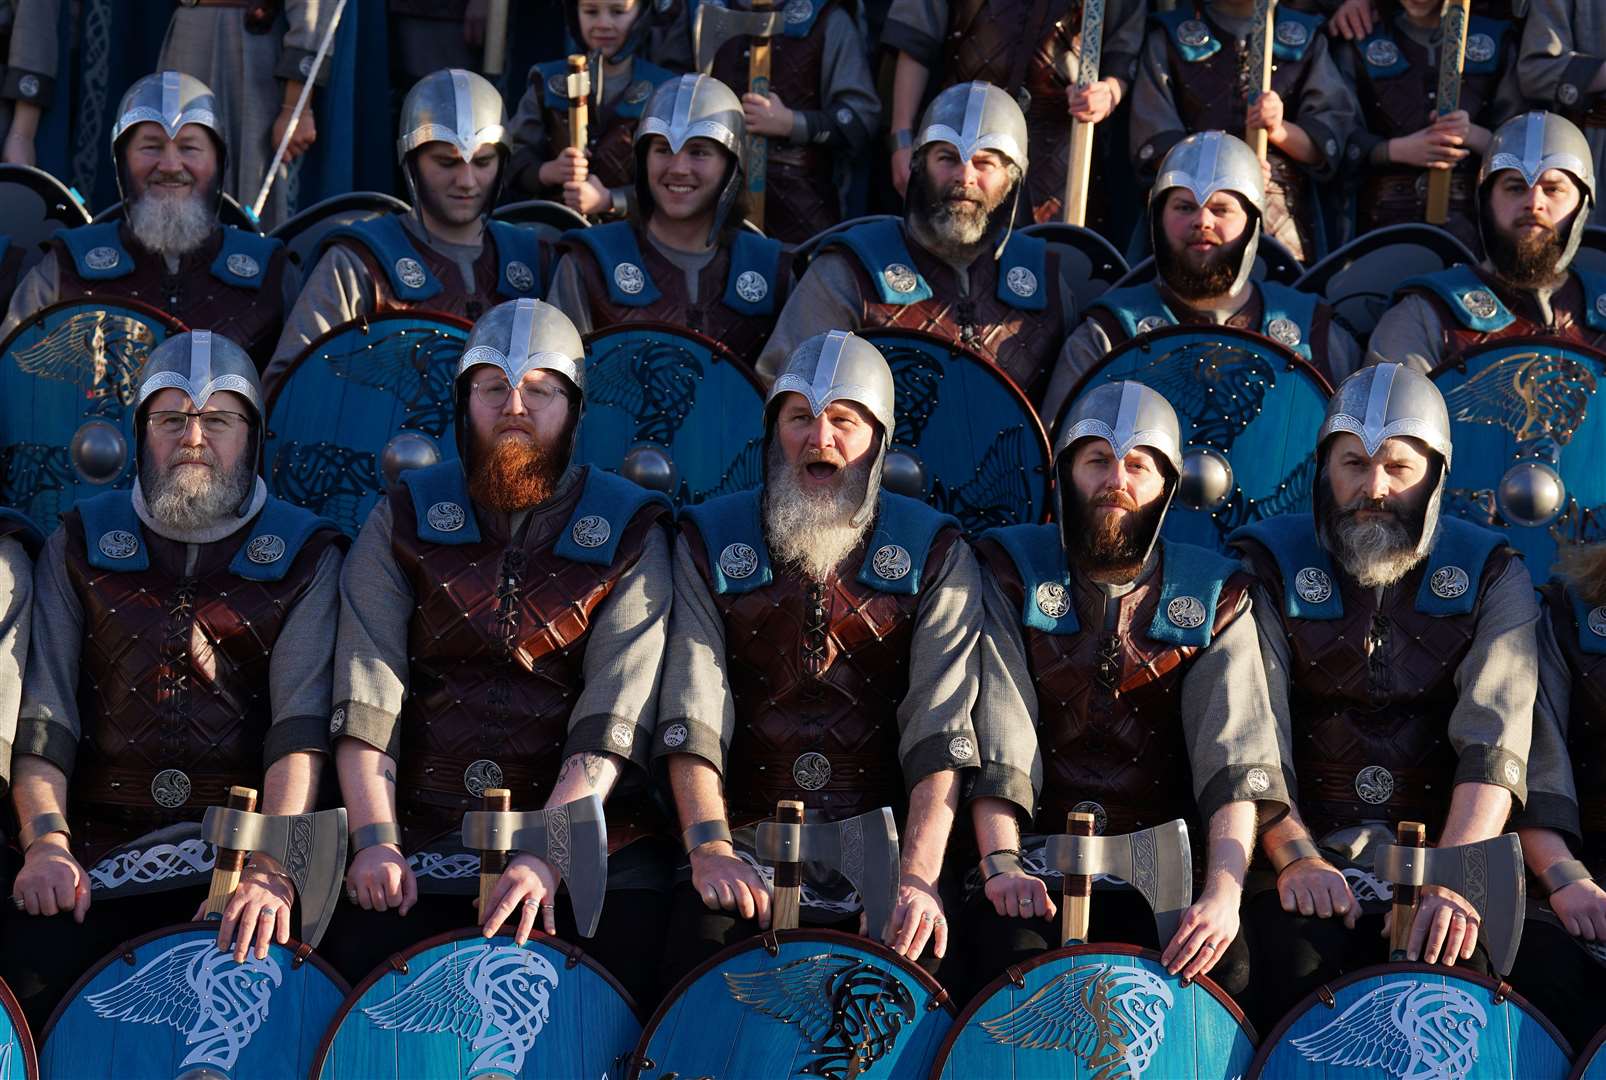 The Jarl Squad after marching through the town (Andrew Milligan/PA)